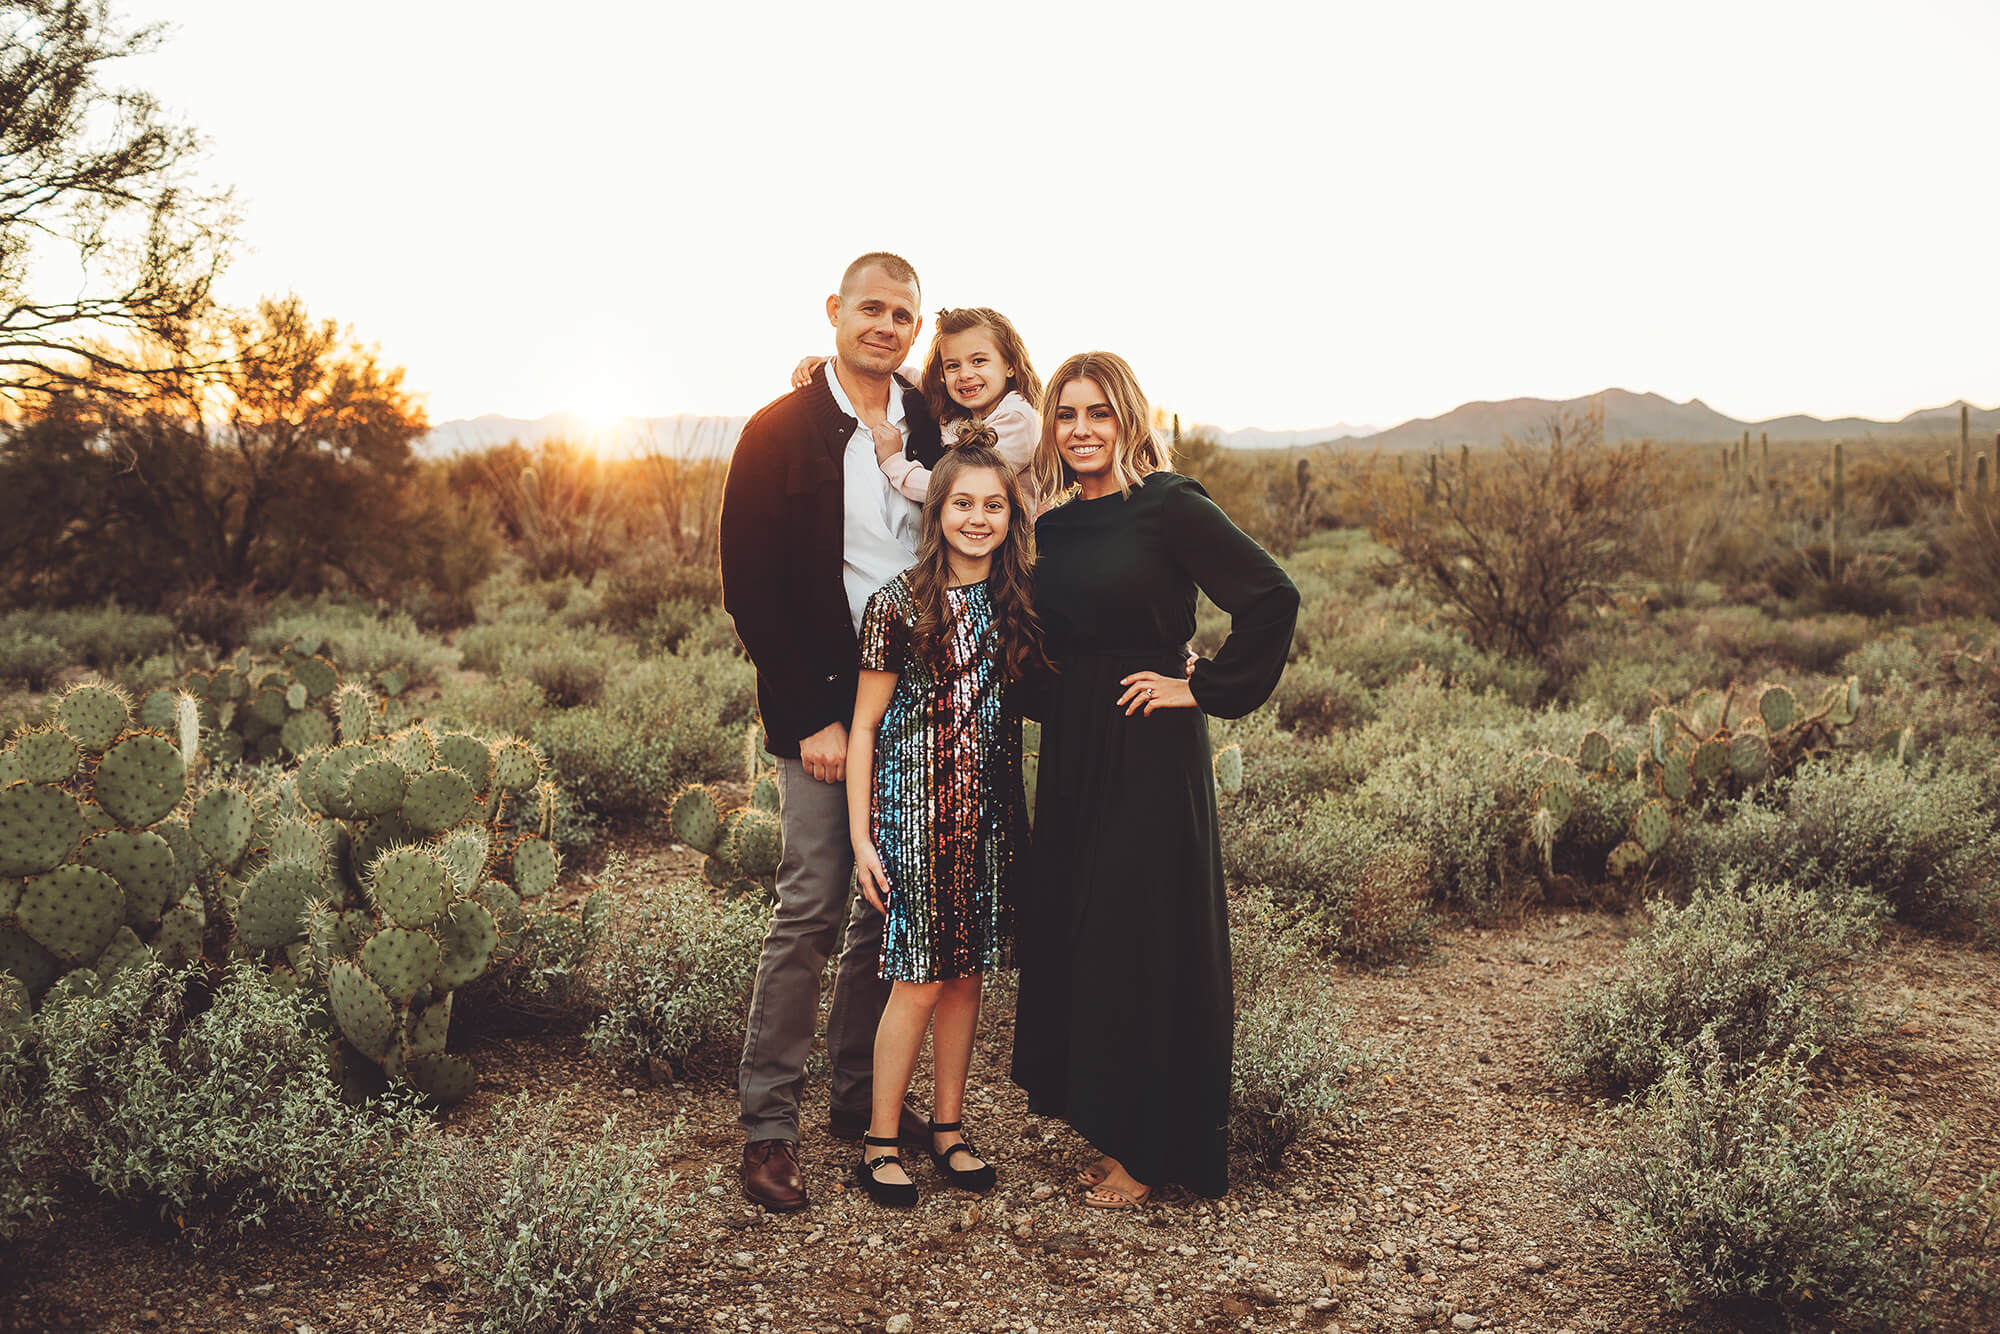 The Gunter family looks amazing as they stand amongst the beautiful Sonoran desert, the setting sun at their backs during their family photoshoot near Tucson with Belle Vie Photography